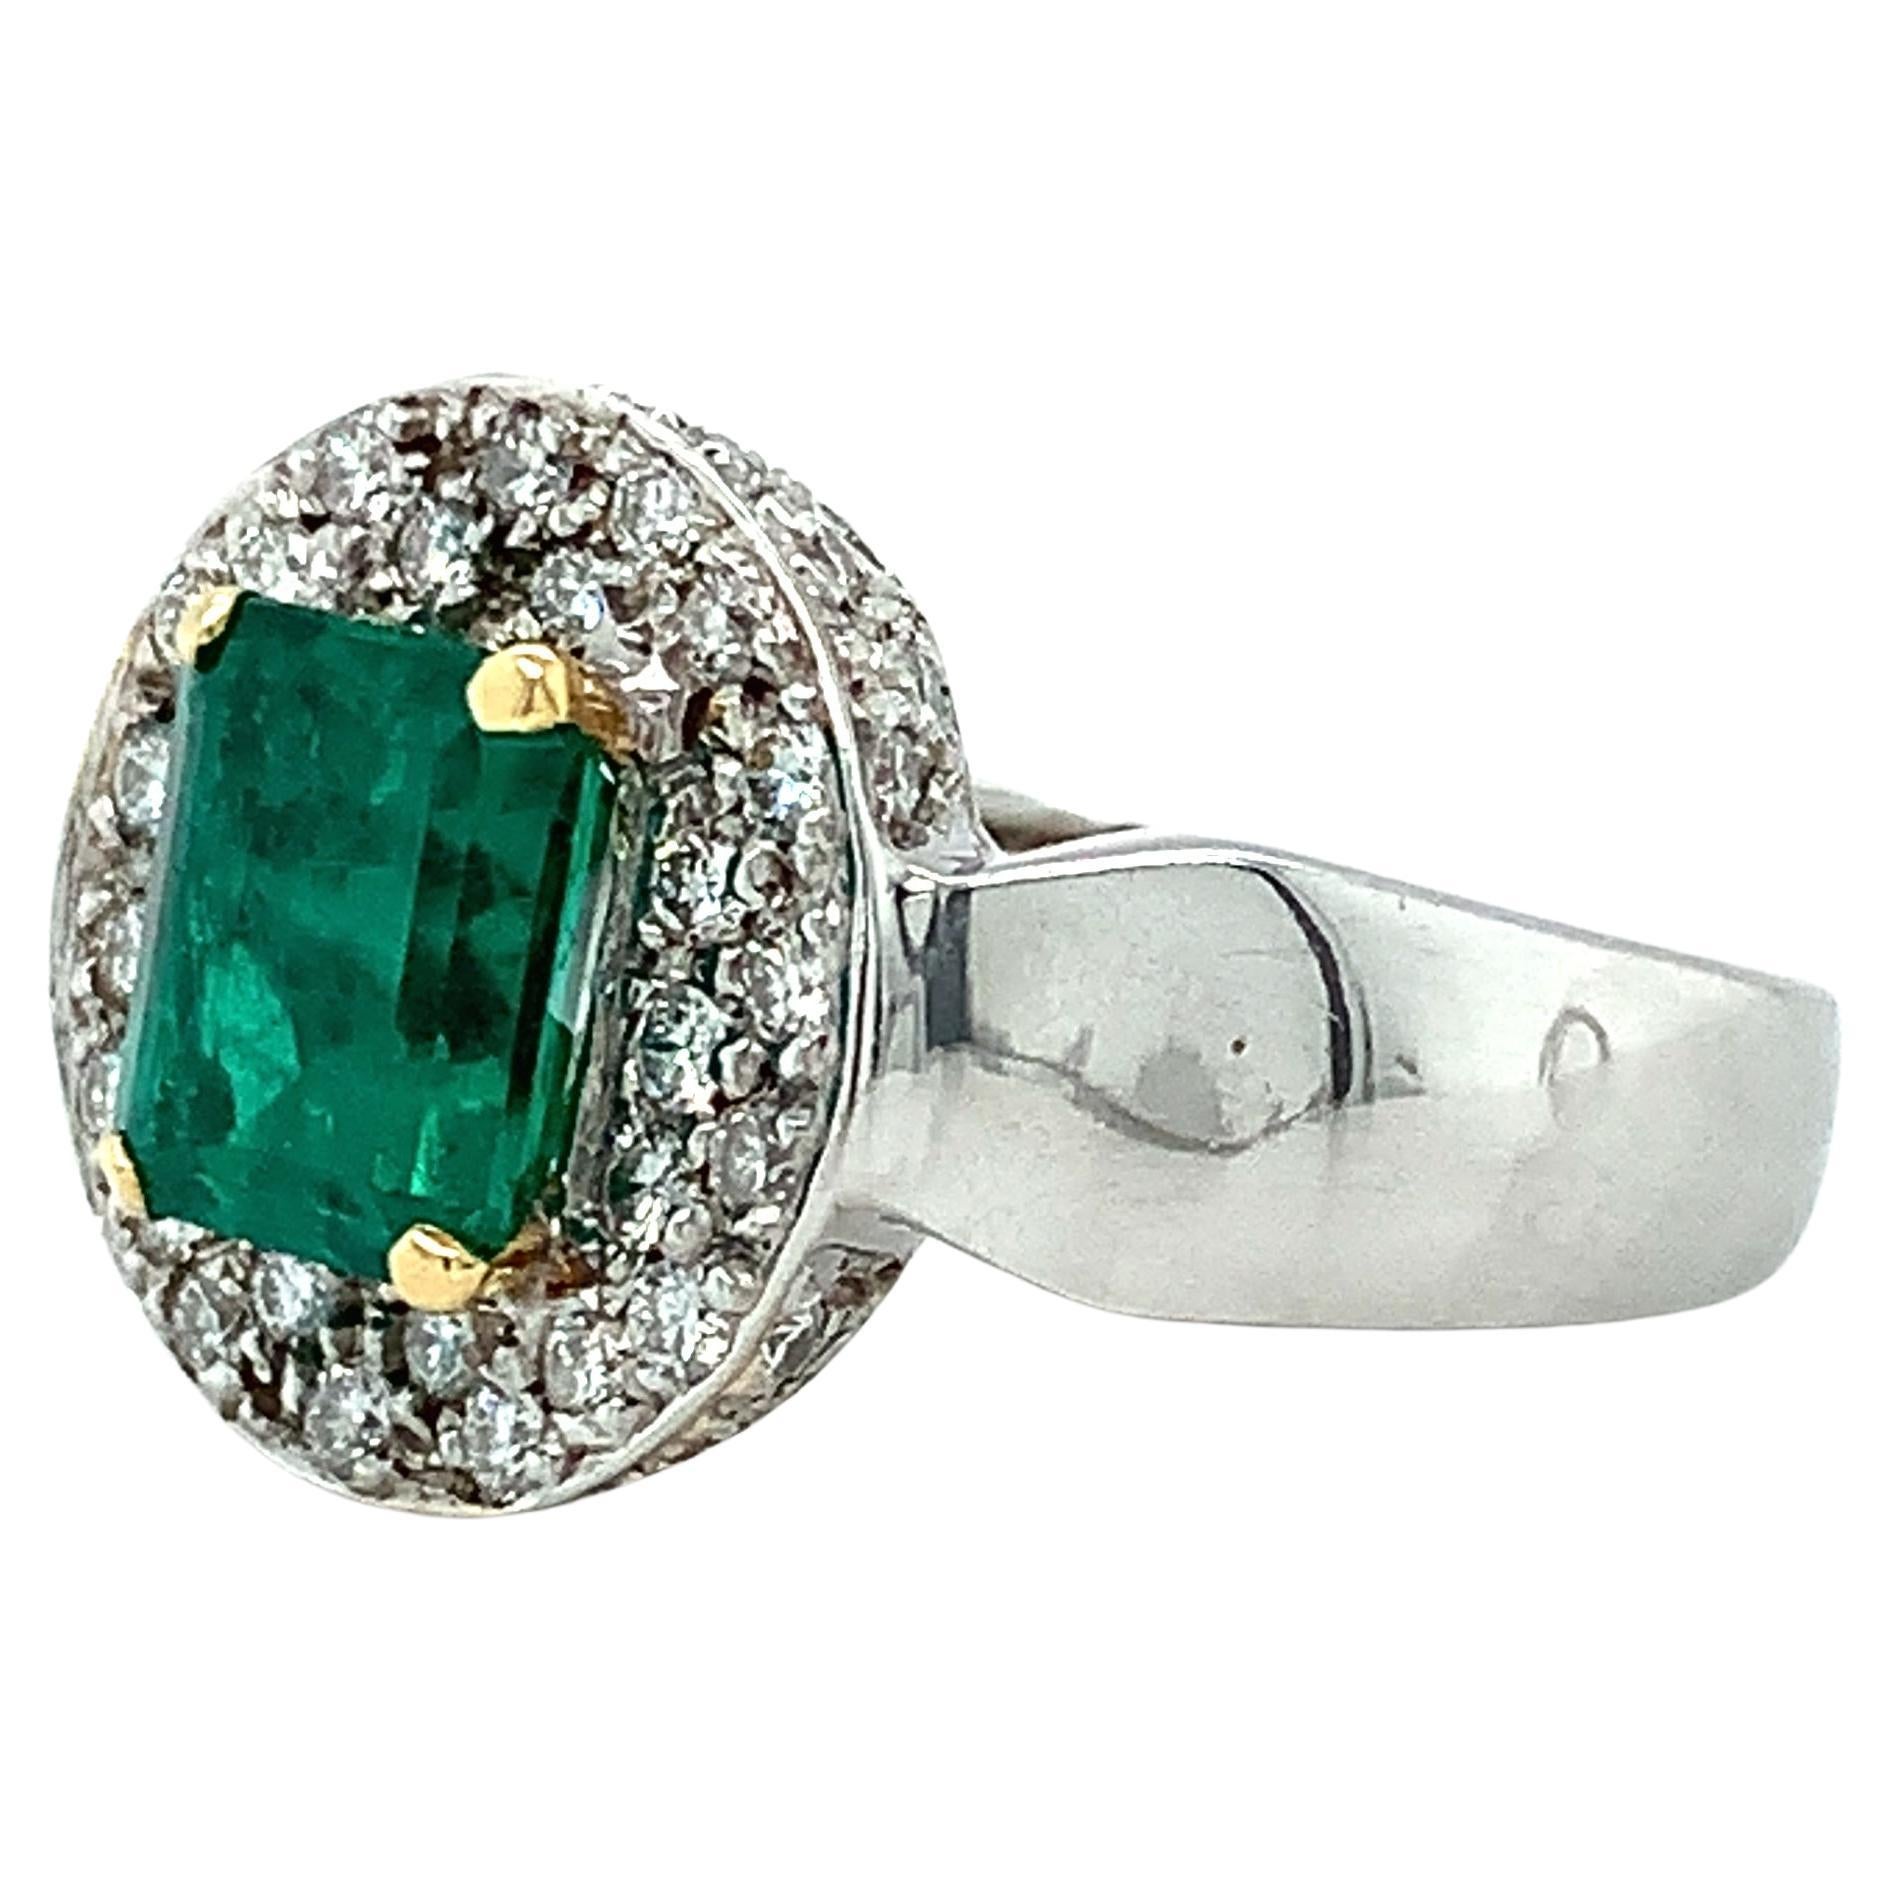 Emerald and Diamond Cocktail Ring in White Gold, 2.05 Carats